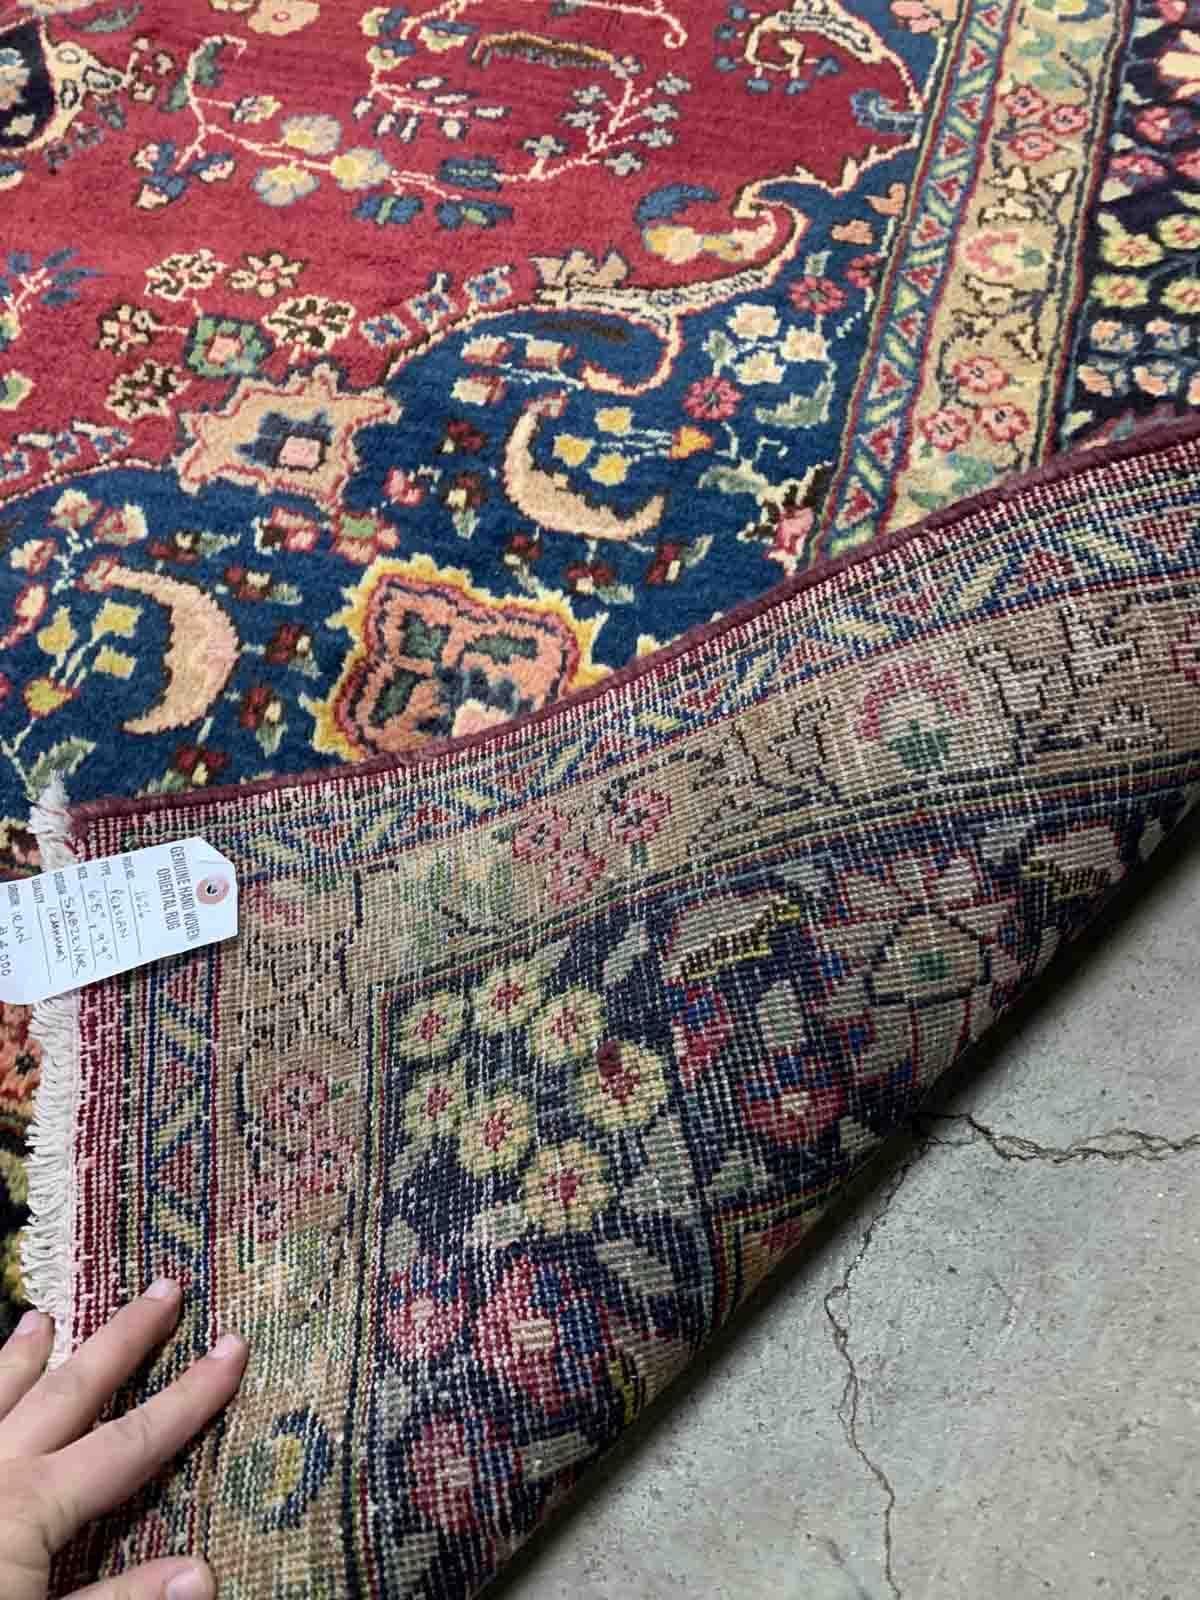 Handmade vintage Middle Eastern rug in traditional design. The rug is from the middle of 20th century in original good condition.

-condition: original good,

-circa: 1950s,

-size: 6.5' x 9.9' (198cm x 302cm),
?
-material: wool,

-country